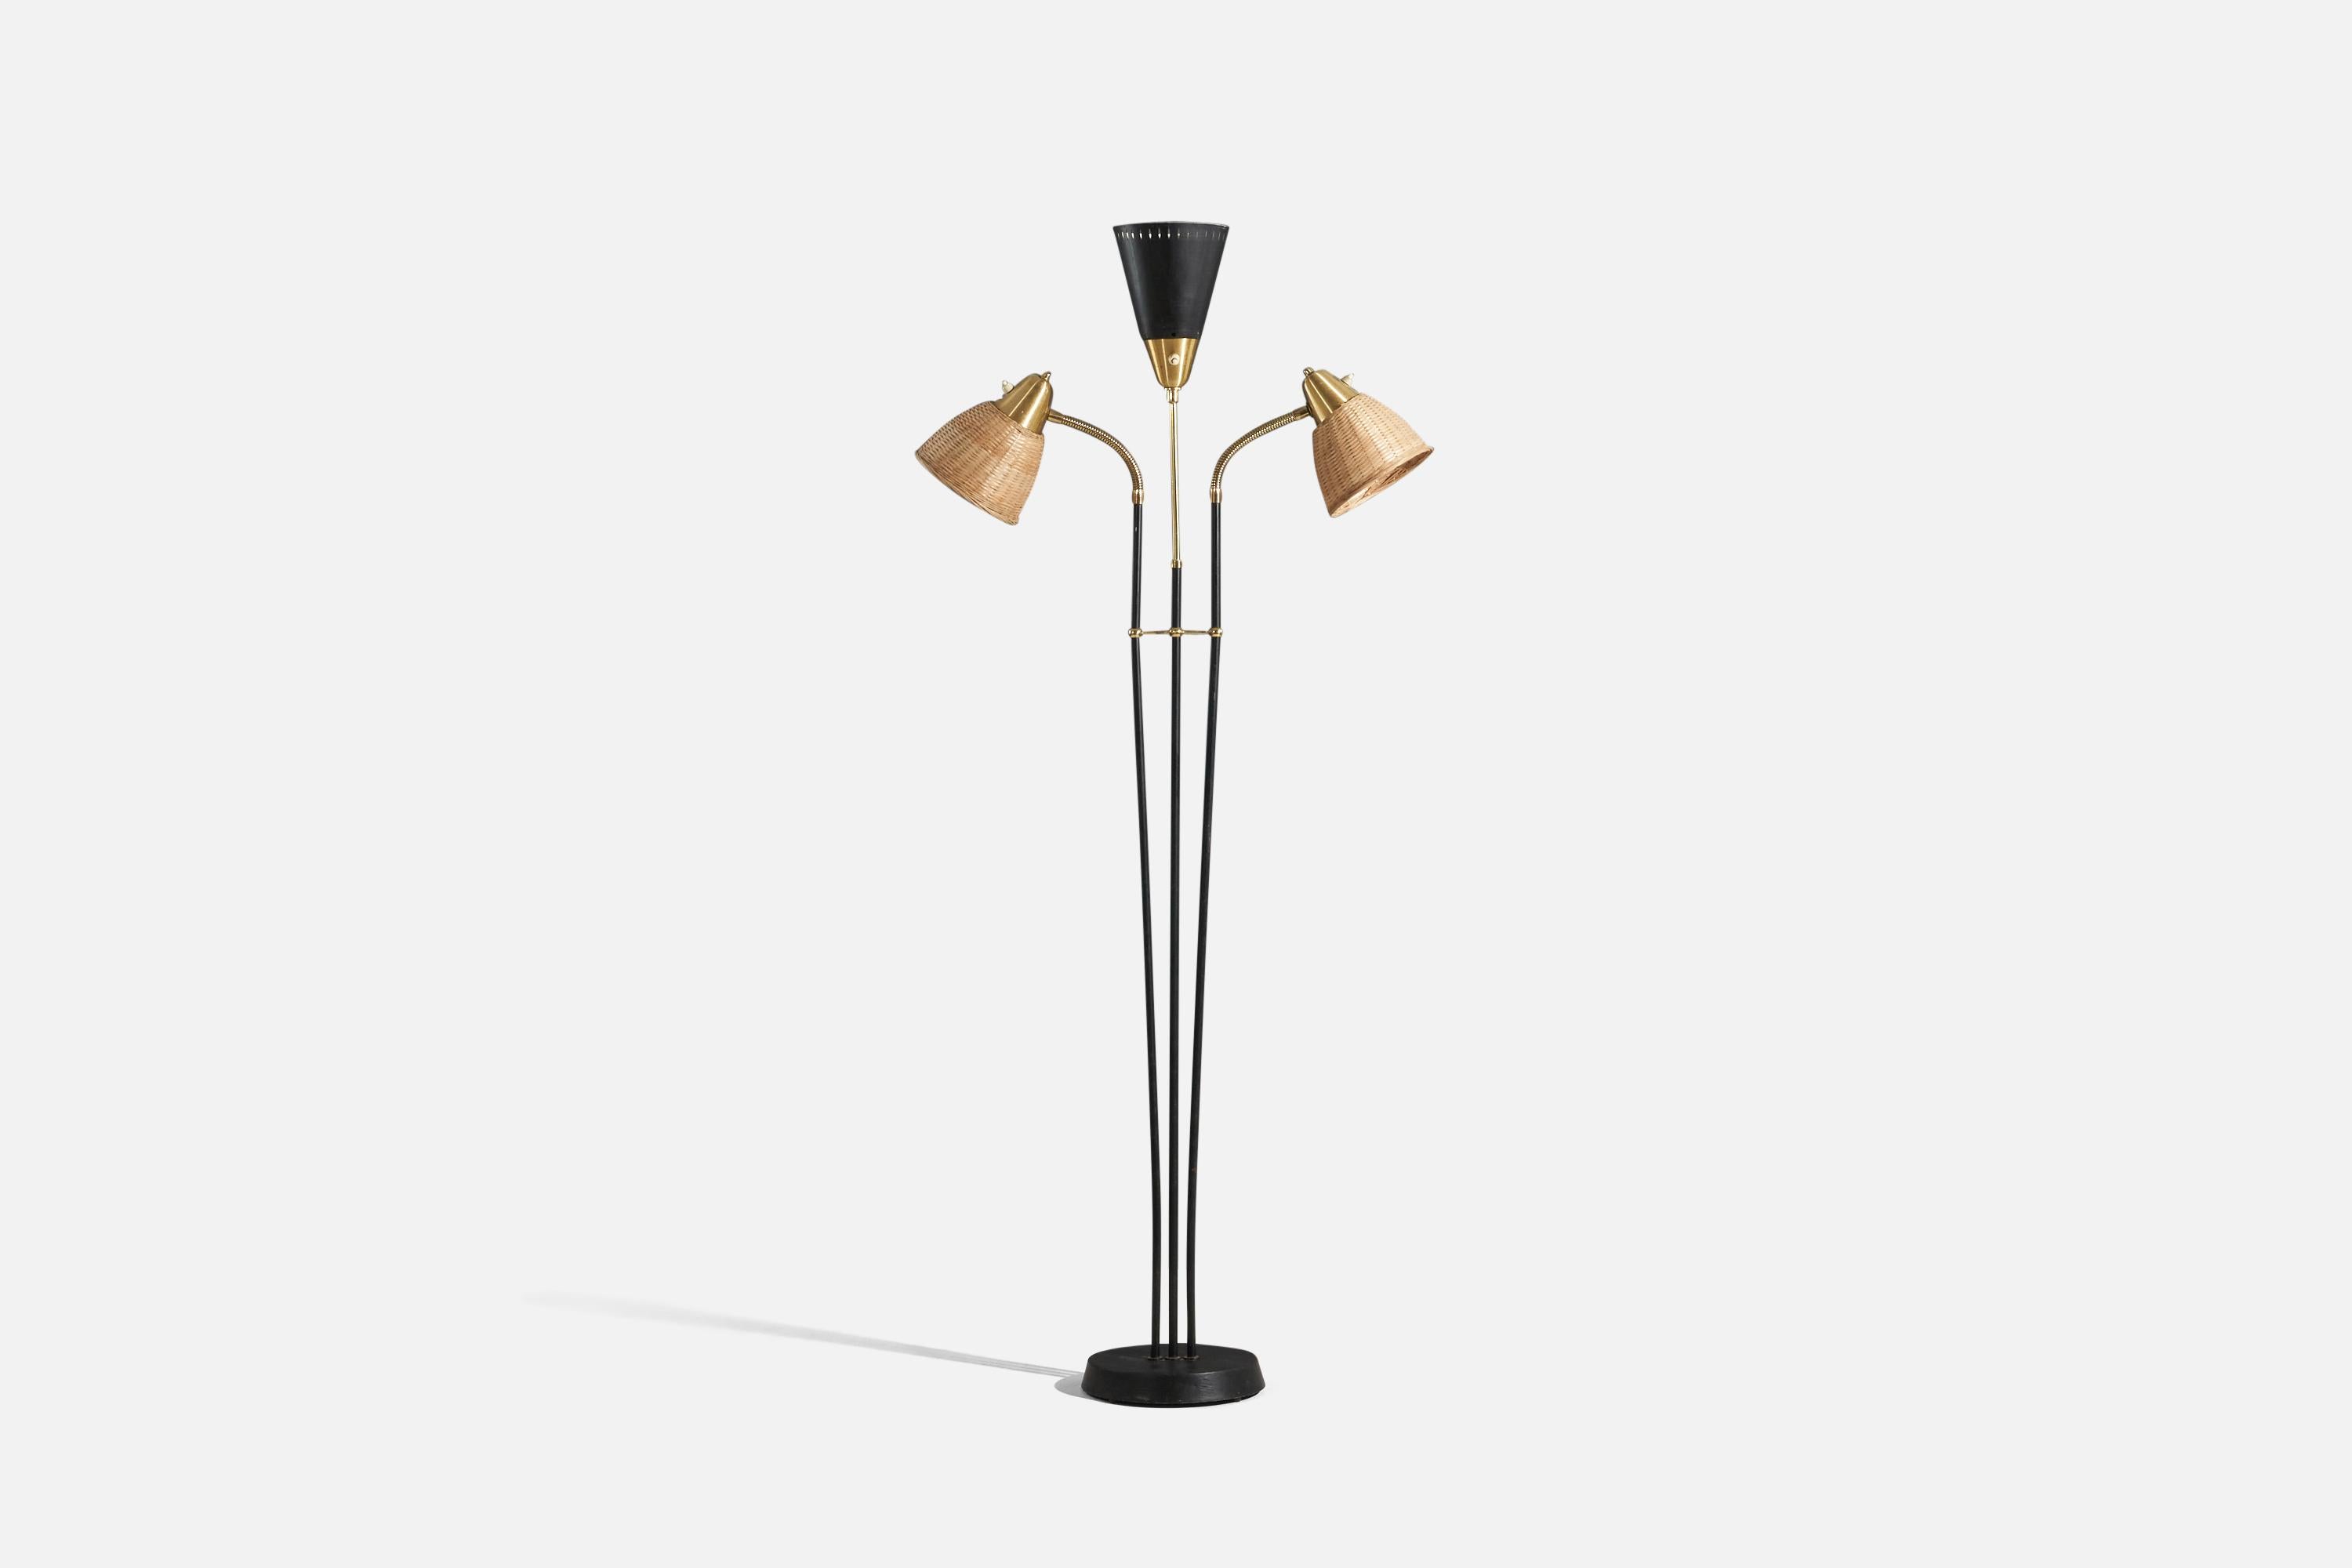 A brass, rattan and black-lacquered metal floor lamp designed and produced by Armaturhantverk Göteborg, Sweden, 1950s.

Sold with Lampshade(s). Dimensions stated are of Floor Lamp with Shade(s). 

Variable dimensions, measured as illustrated in the